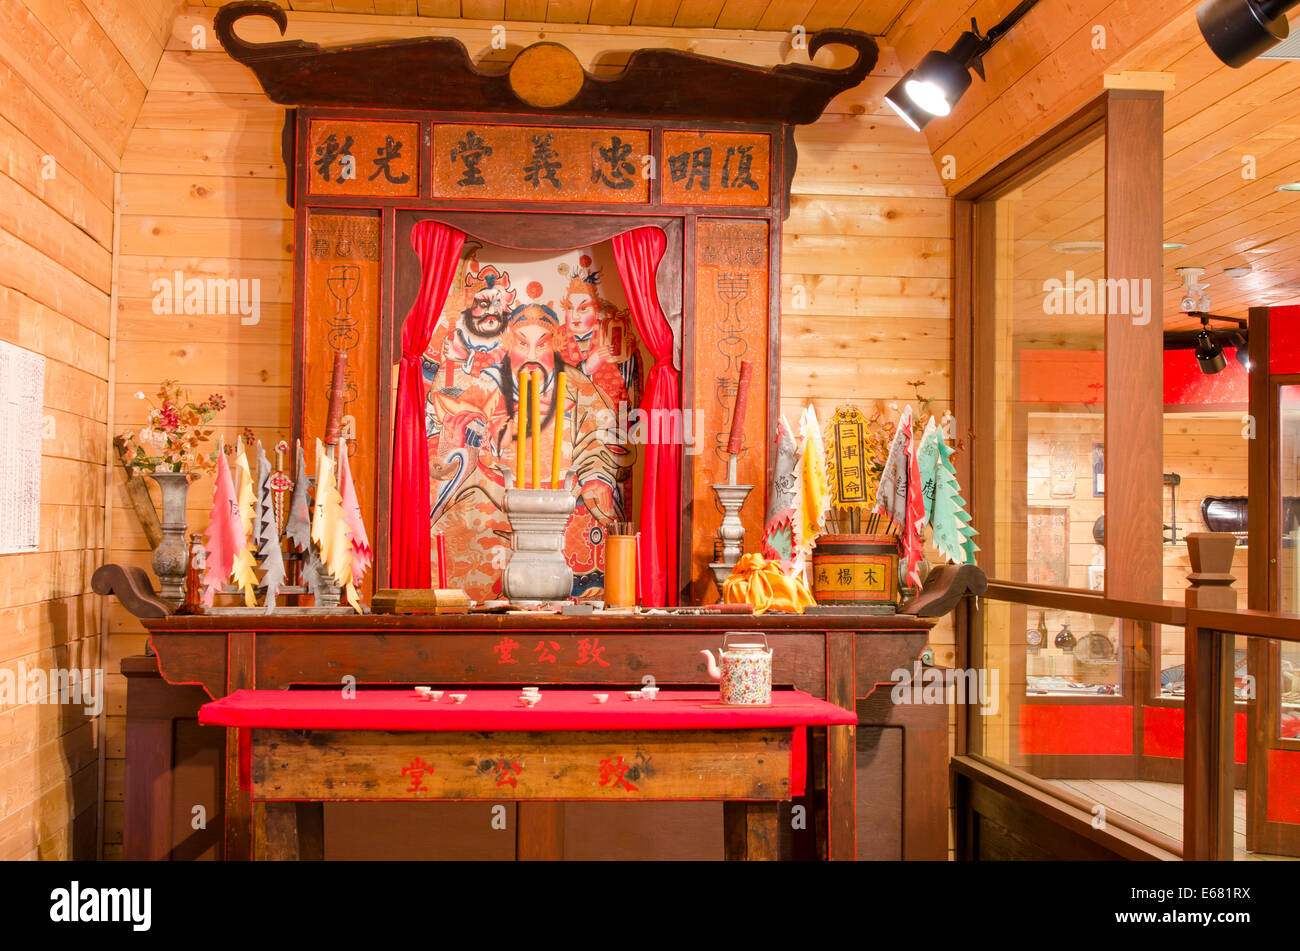 Altar shrine Chee Kung Tong Chinese Freemasons temple museum building historic gold town Barkerville, British Columbia, Canada. Stock Photo